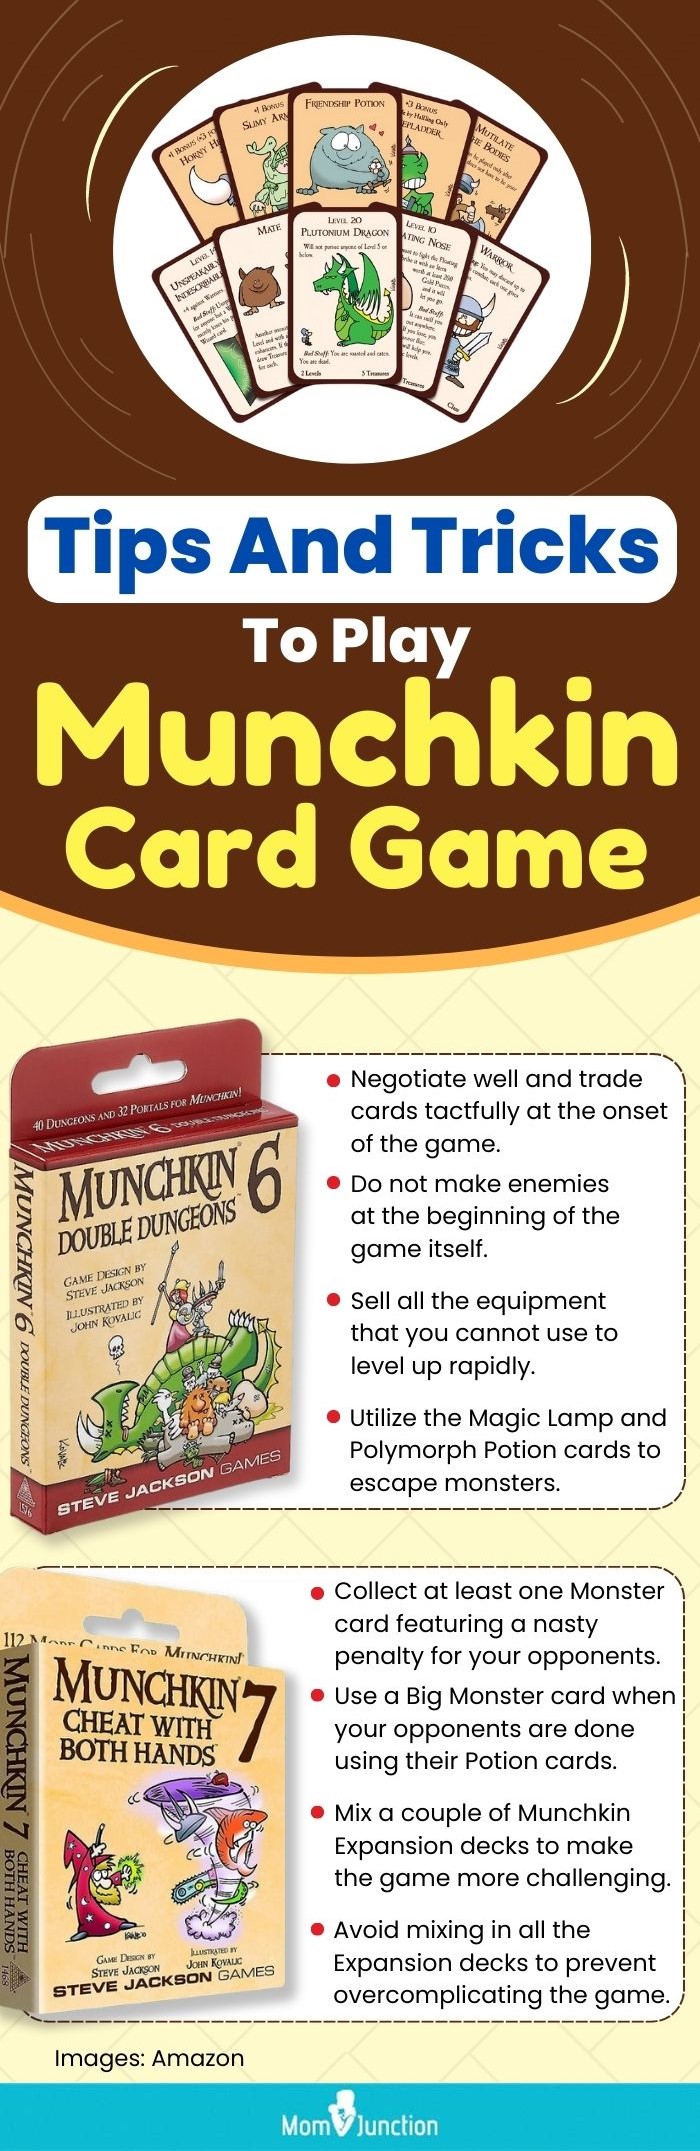 Munchkin 4 – The Need for Steed: Munchkin's Best Expansion